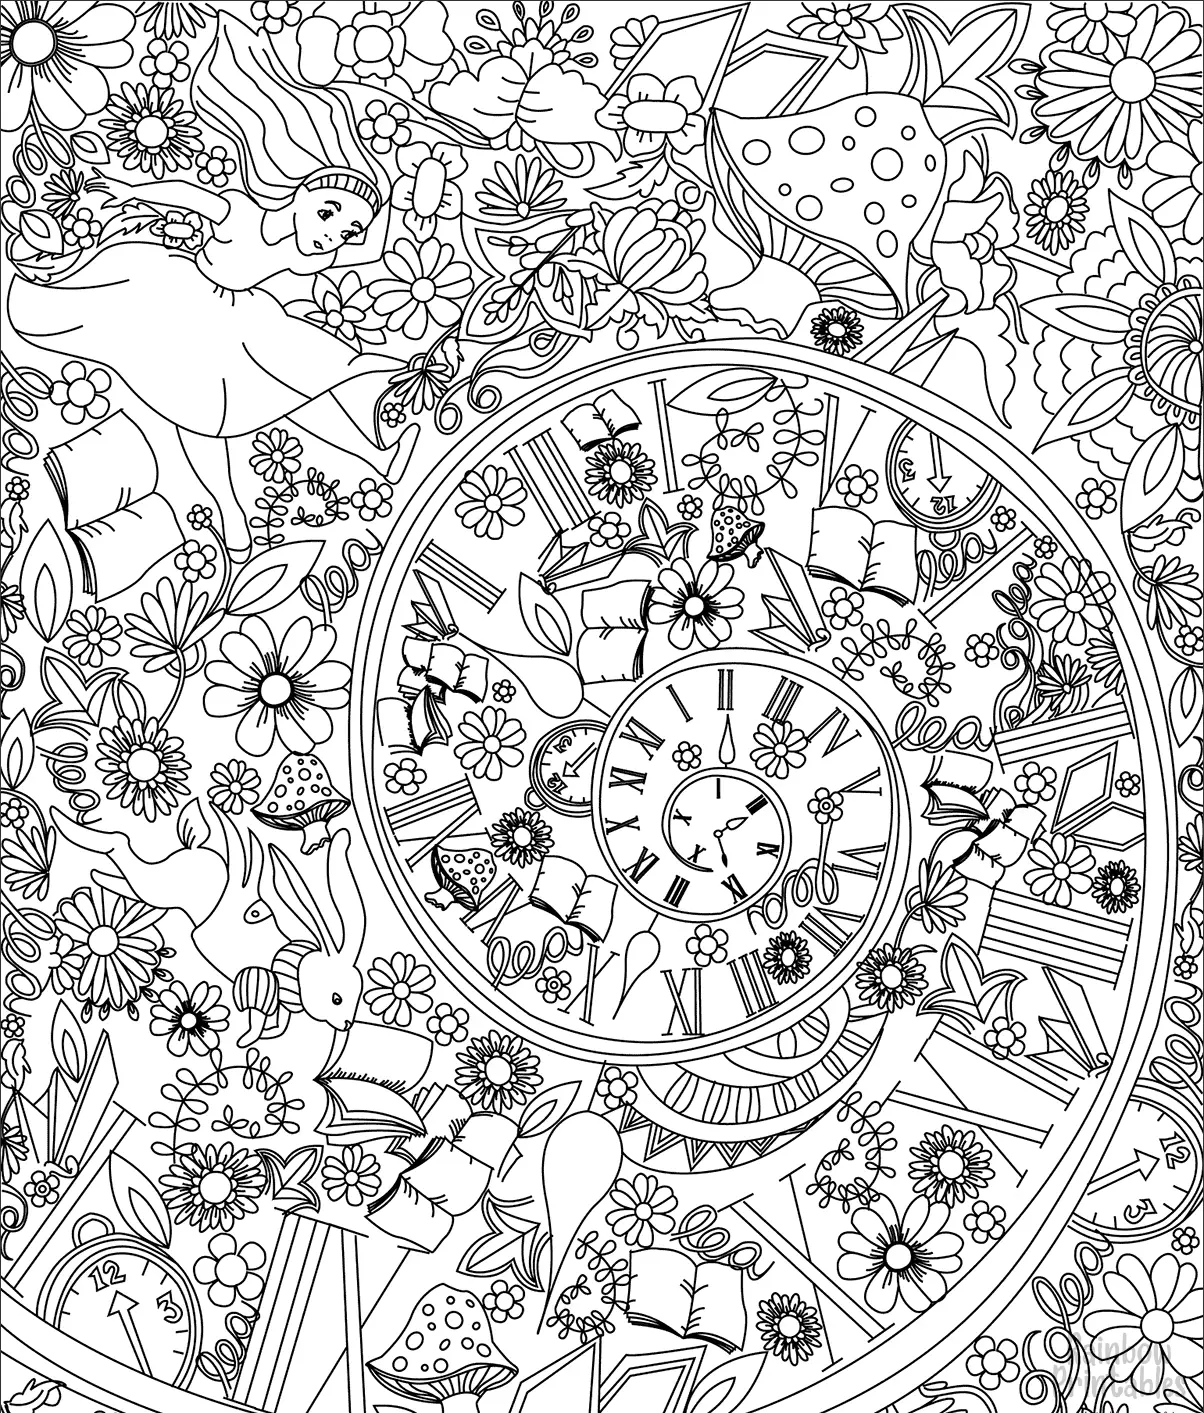 ABSTRACT Alice in Wonderland Time Down the Rabbit Hole Mandala Coloring Pages for Kids Adults Boredom Art Activities Line Art